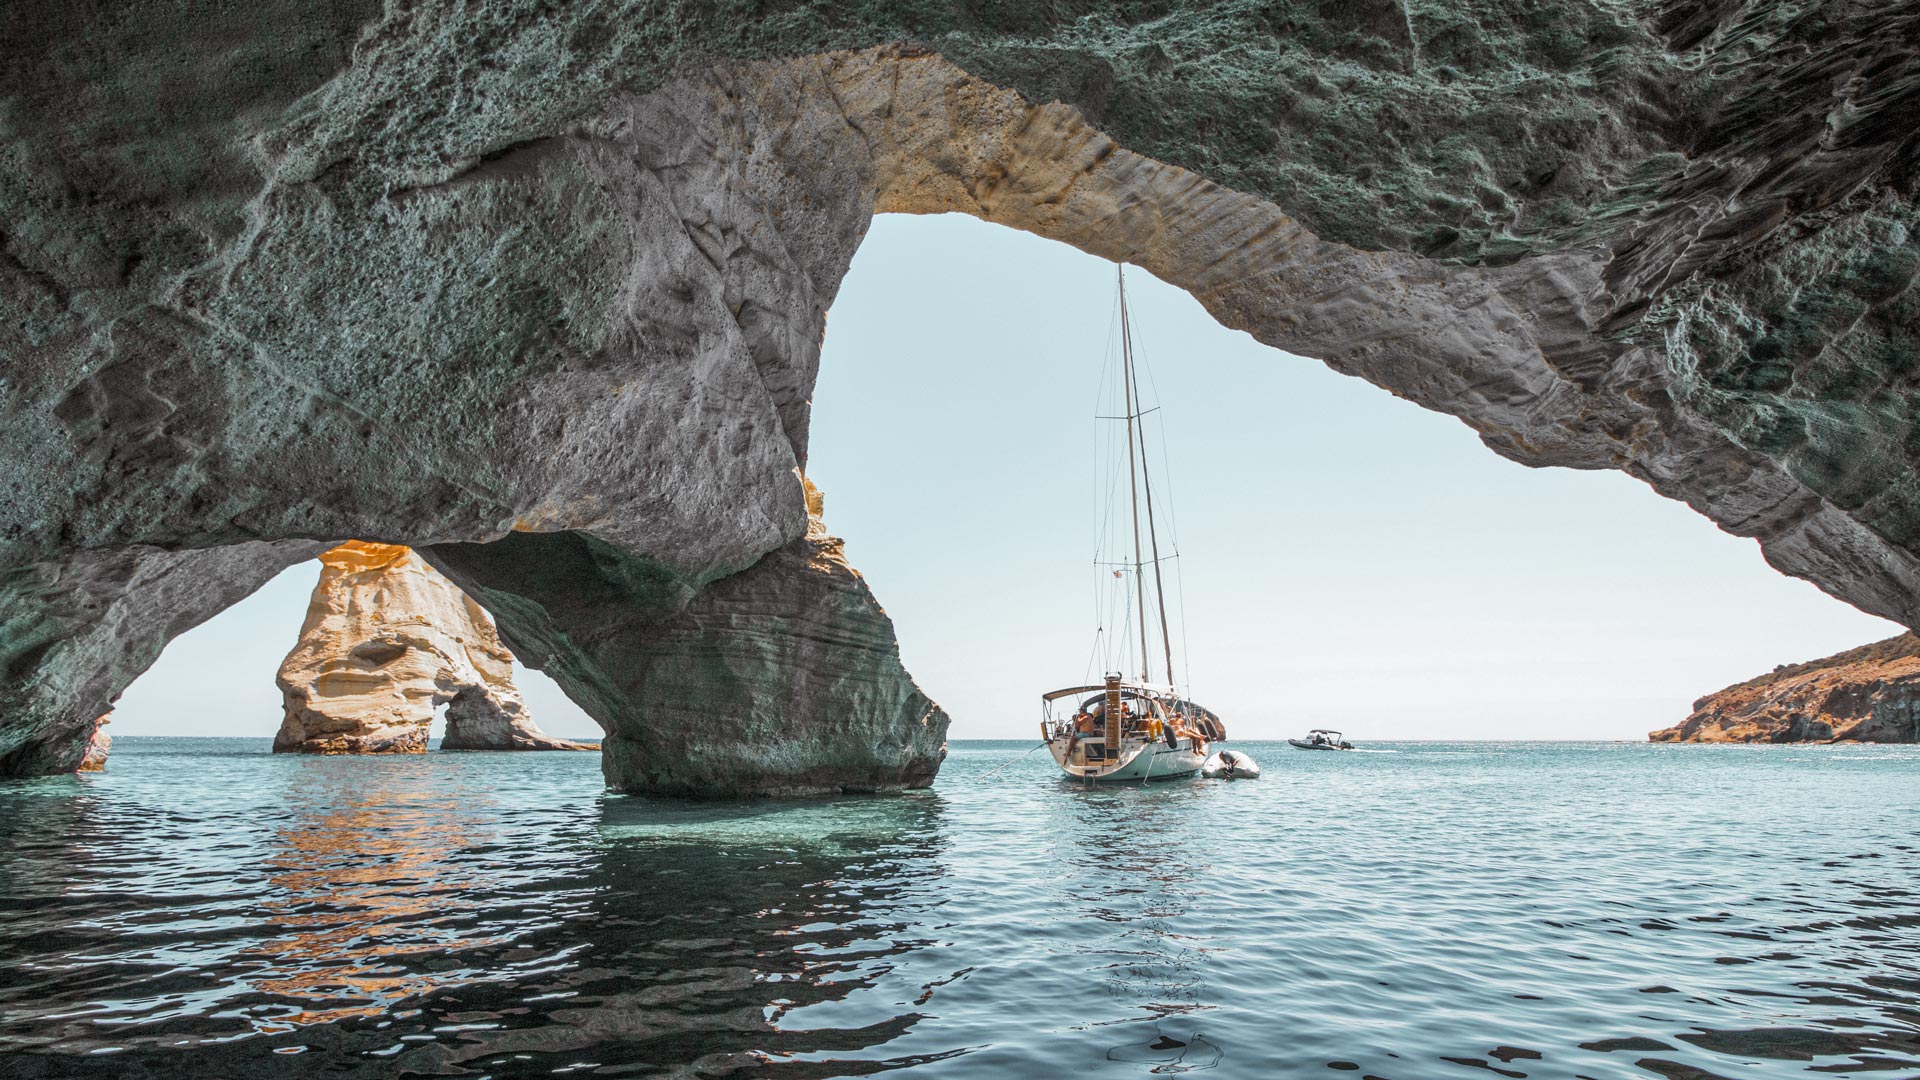 Kleftiko, a complex of volcanic rocks, one of the most recognizable landscapes of Milos